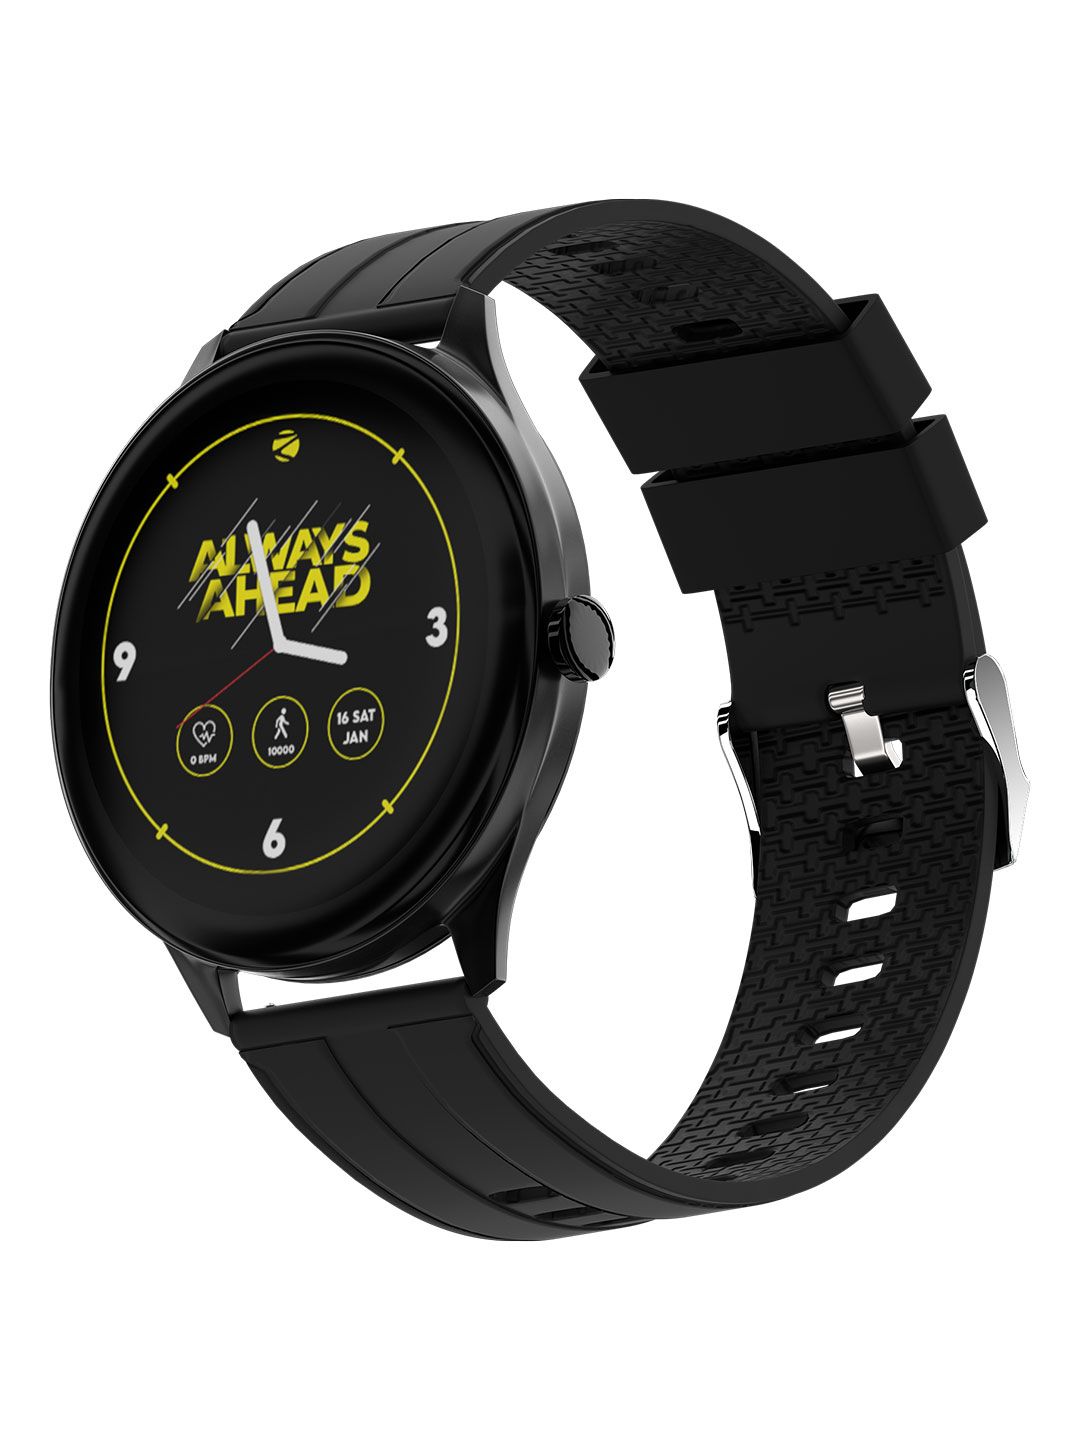 ZEBRONICS Black FIT2220CH Smart Watch Price in India